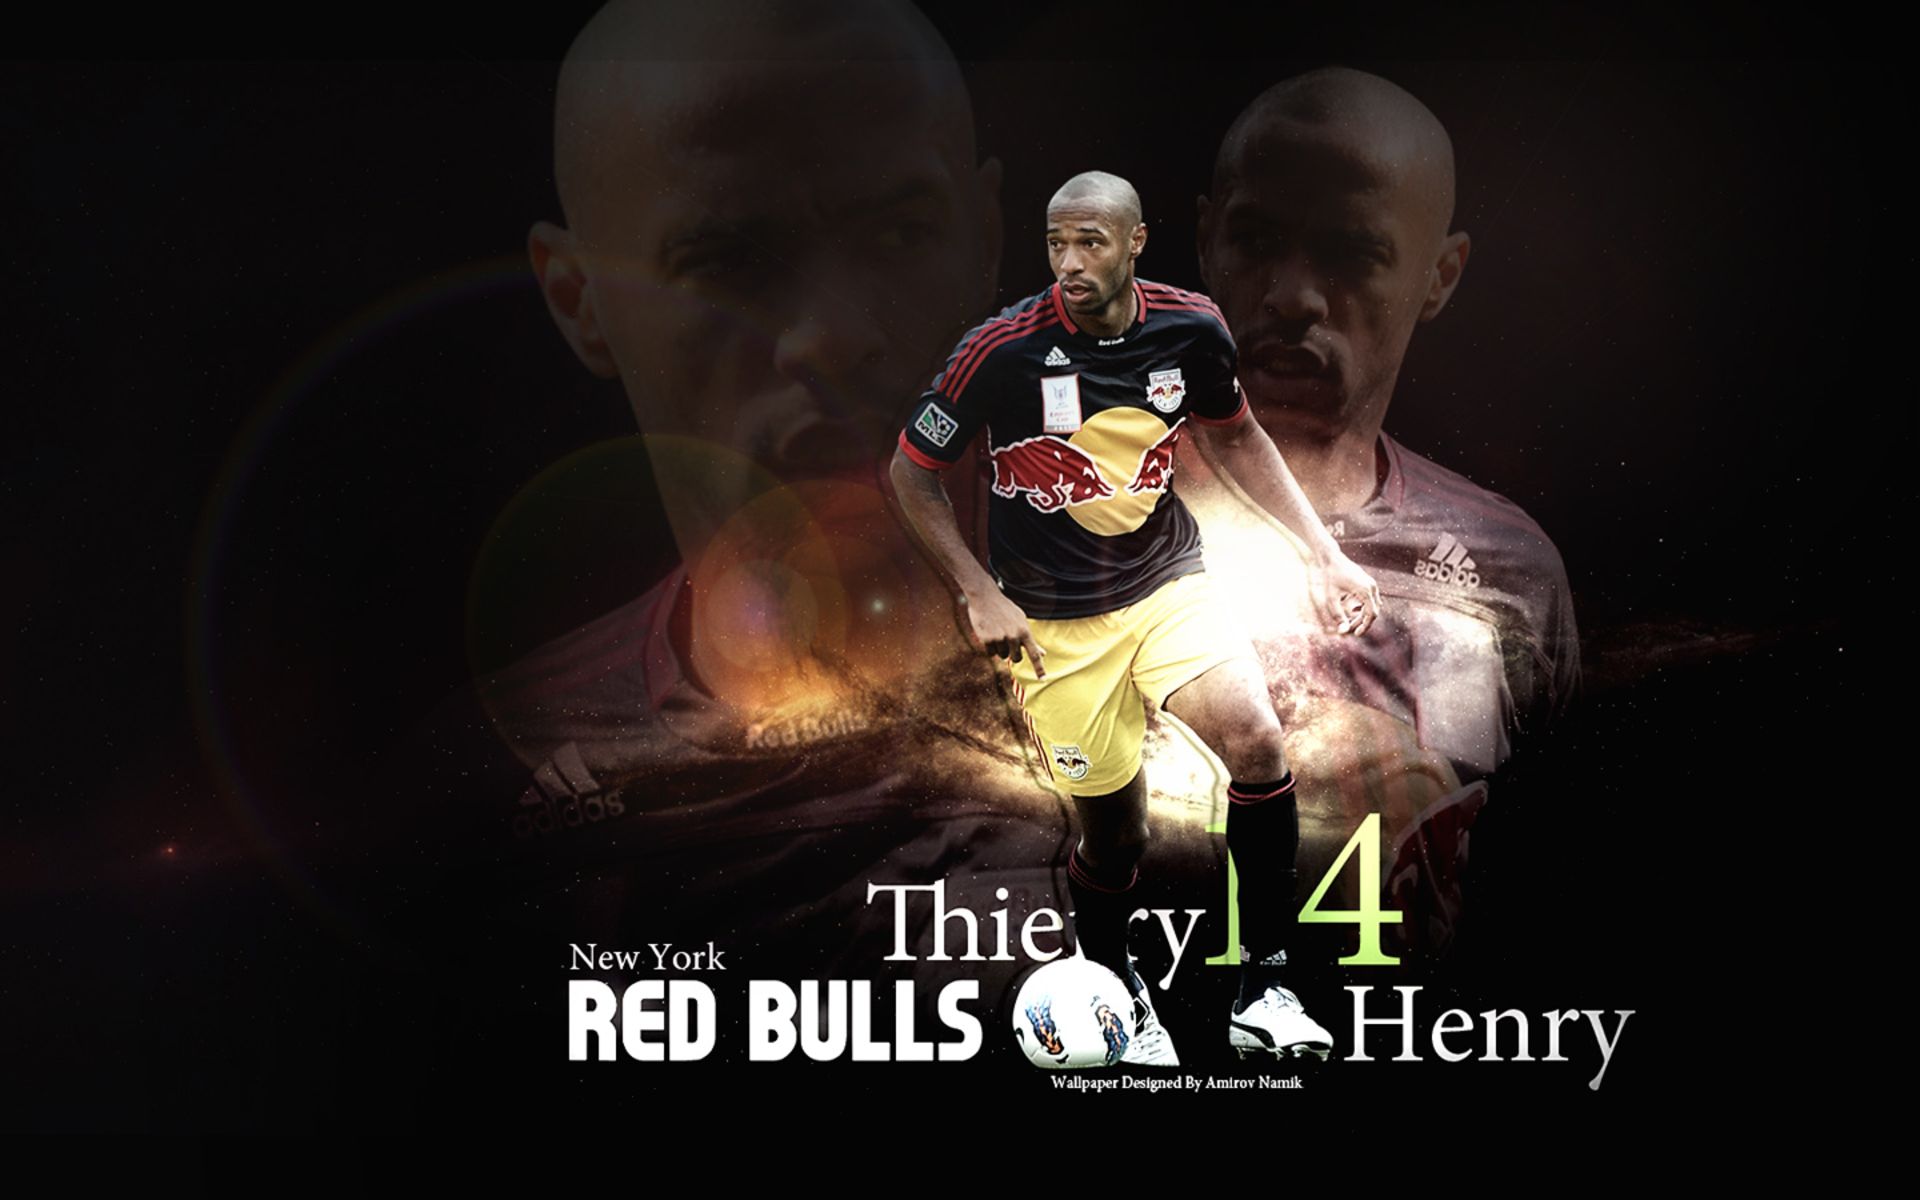 sports, thierry henry, new york red bulls, soccer